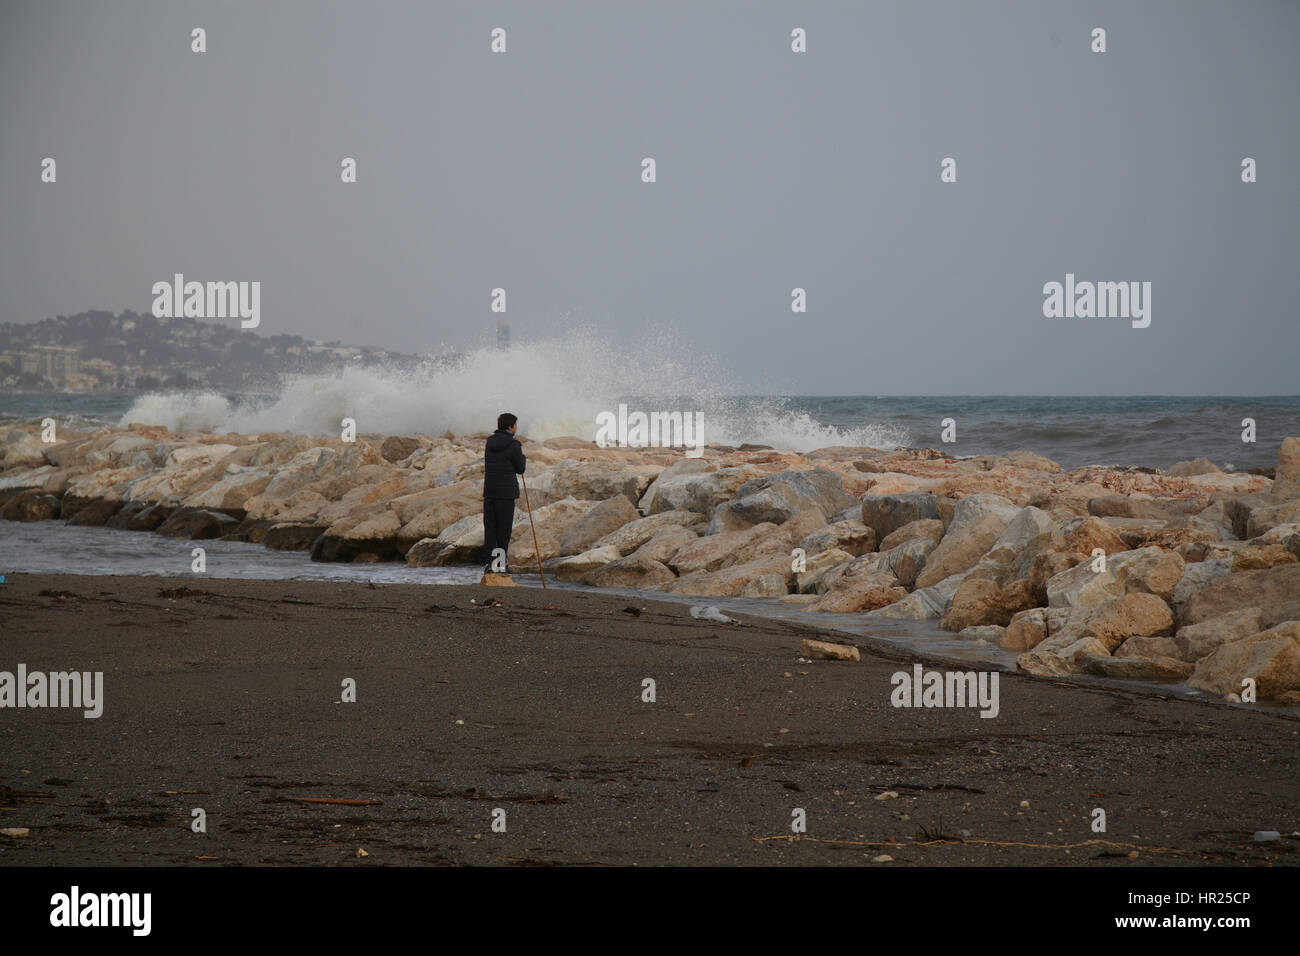 A boy looking when a large wave meets a breakwater. Malaga. Spain Stock Photo